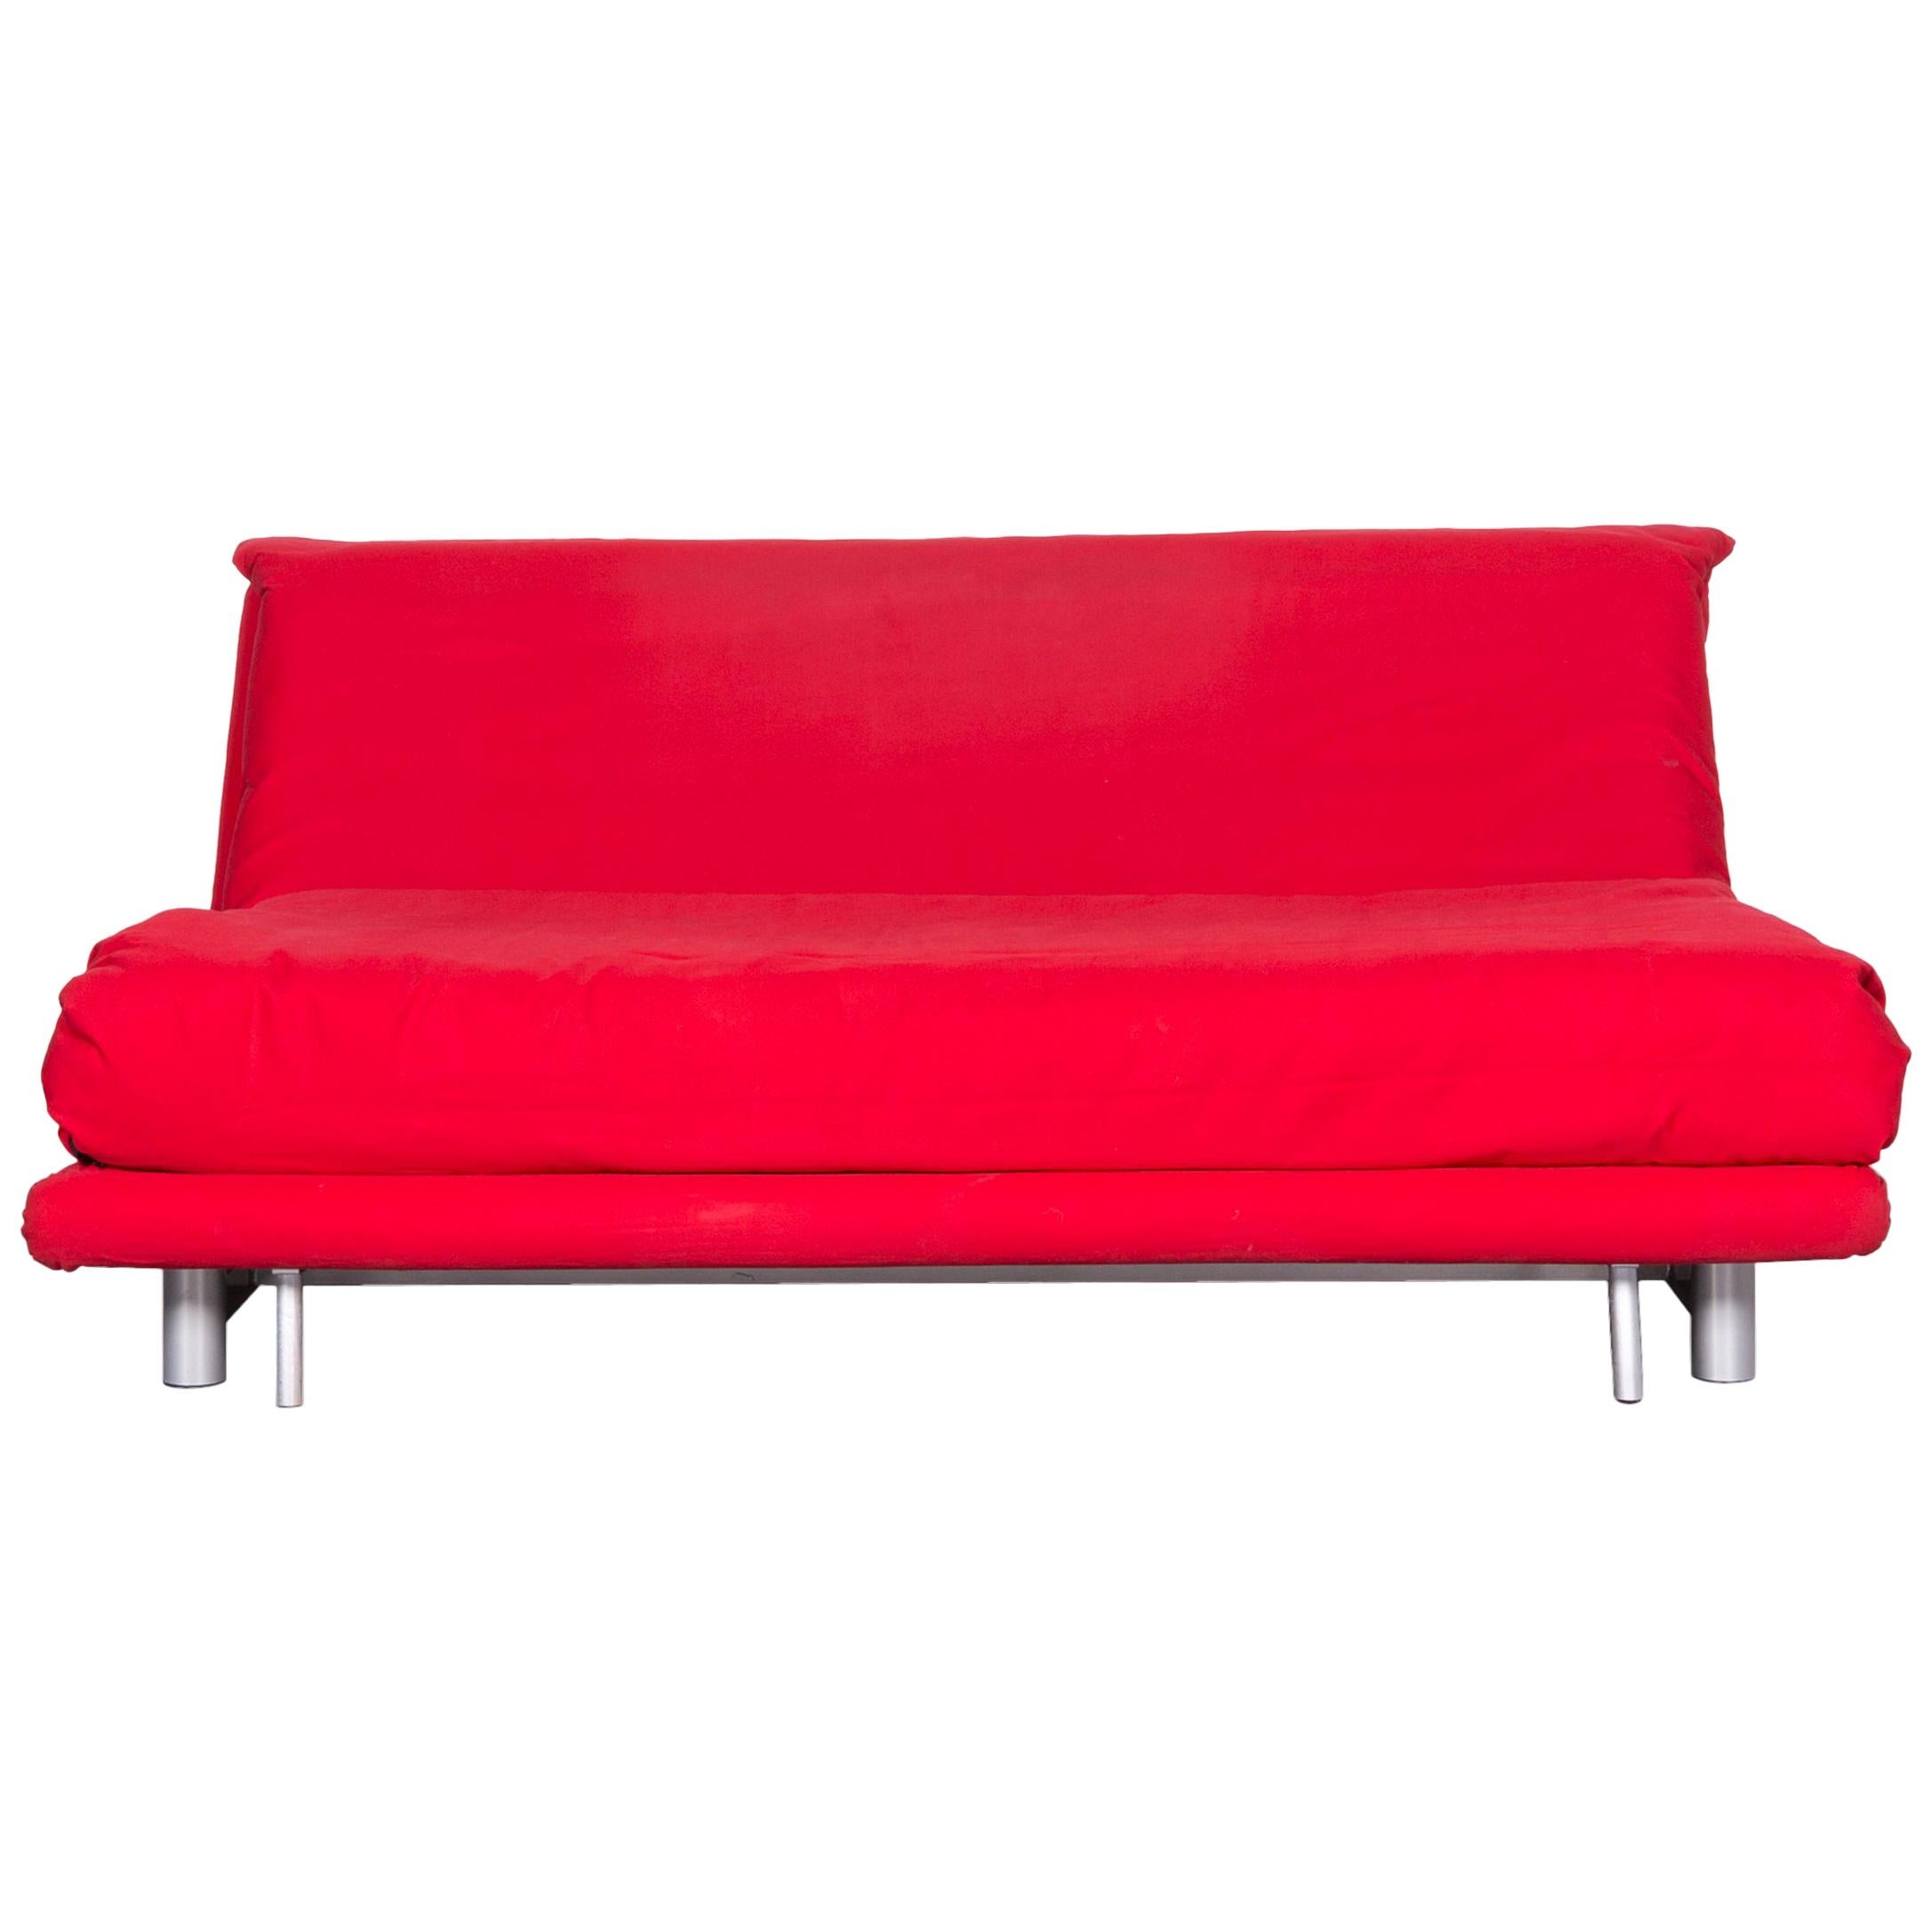 Ligne Roset Multy Fabric Sofa Bed Red Two-Seat Couch Sleep Function For Sale